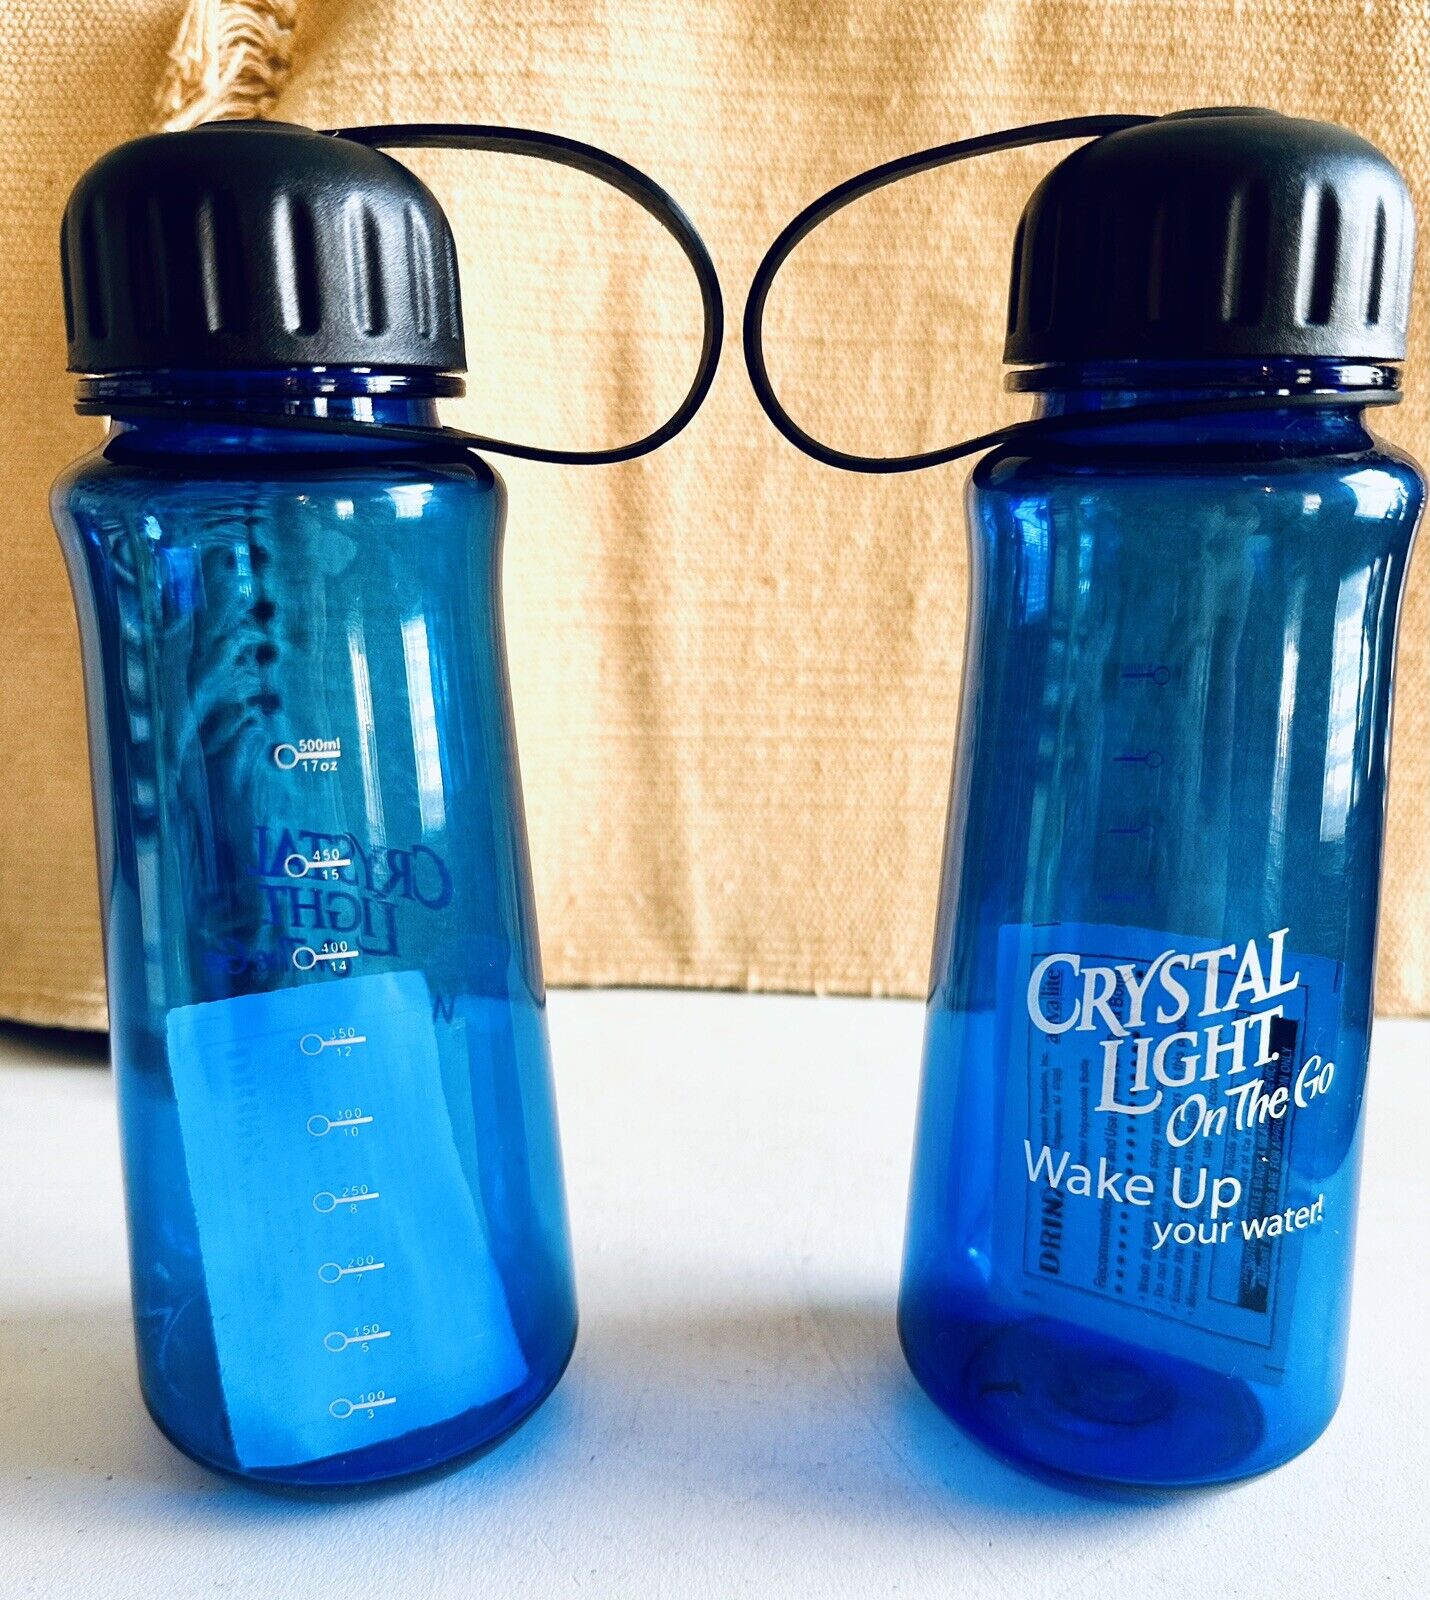 CRYSTAL LIGHT On The Go “Wake Up Your Water” Advertising Merch Water Bottles